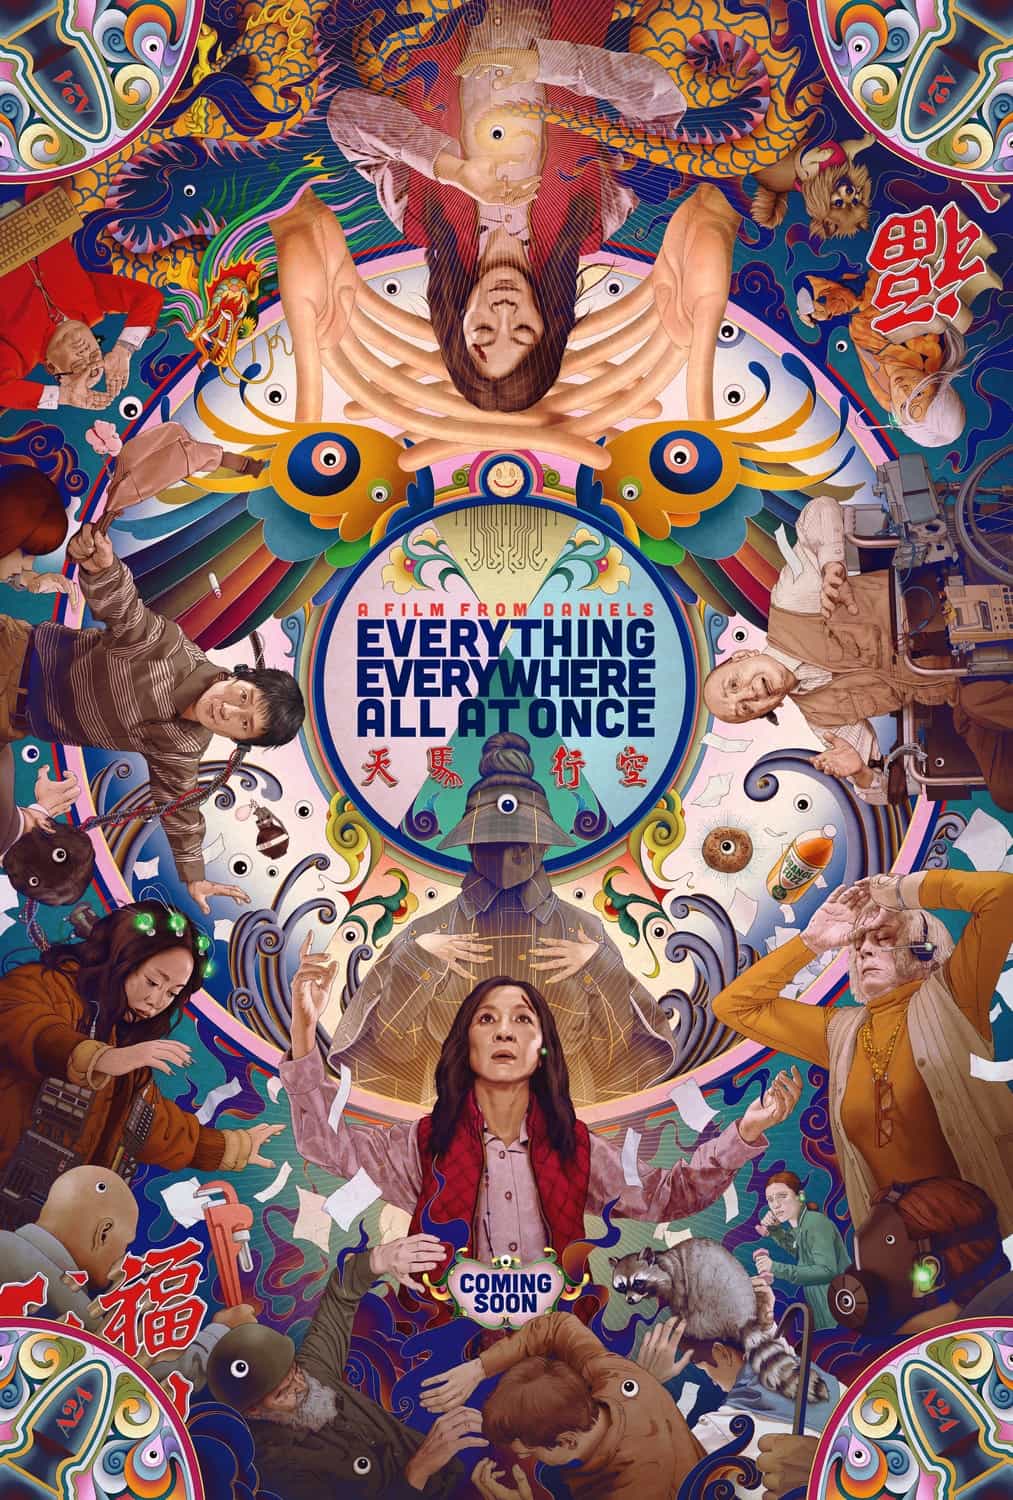 Everything Everywhere all at Once heads up the 2023 Oscar nominations list with 11 nods including Best Picture and Best Actress